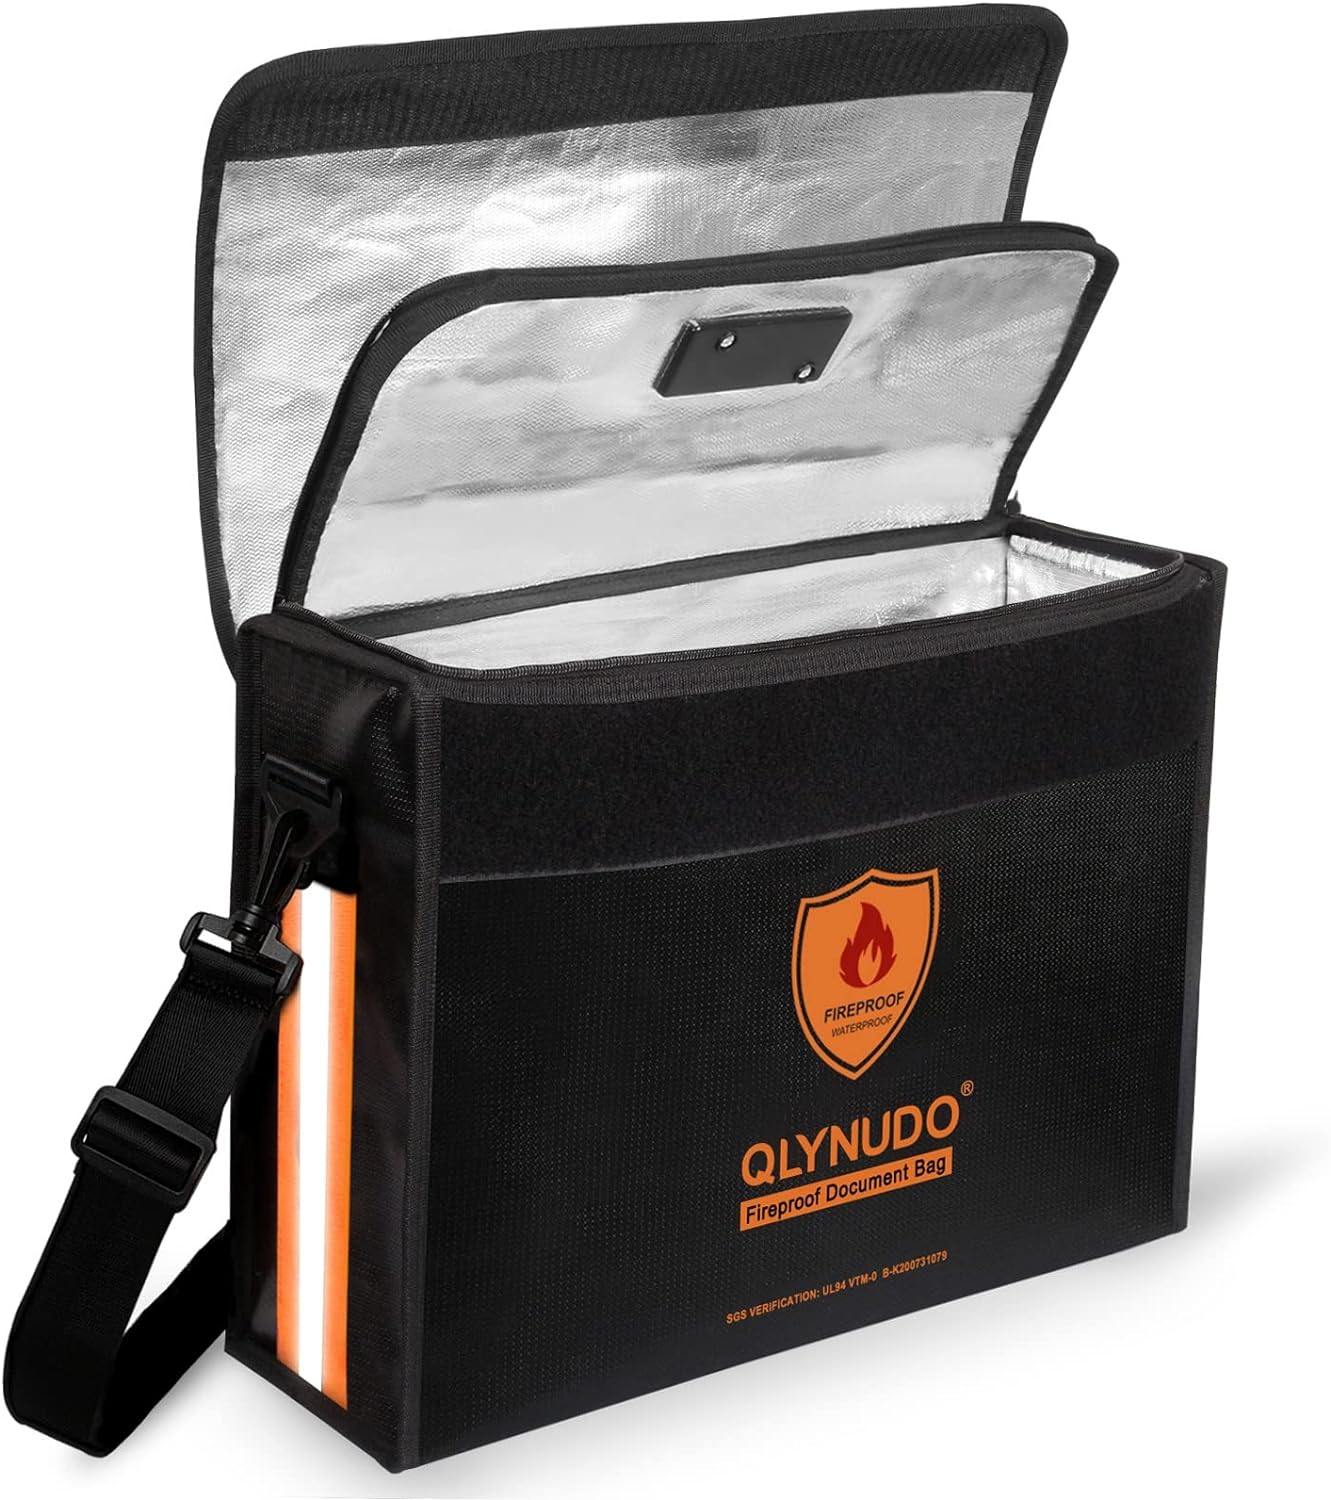 QLYNUDO Waterproof Fireproof Document Bag with Lock - Important Document Holder, 17 x 12 x 5.5" Large Fireproof Box for Documents